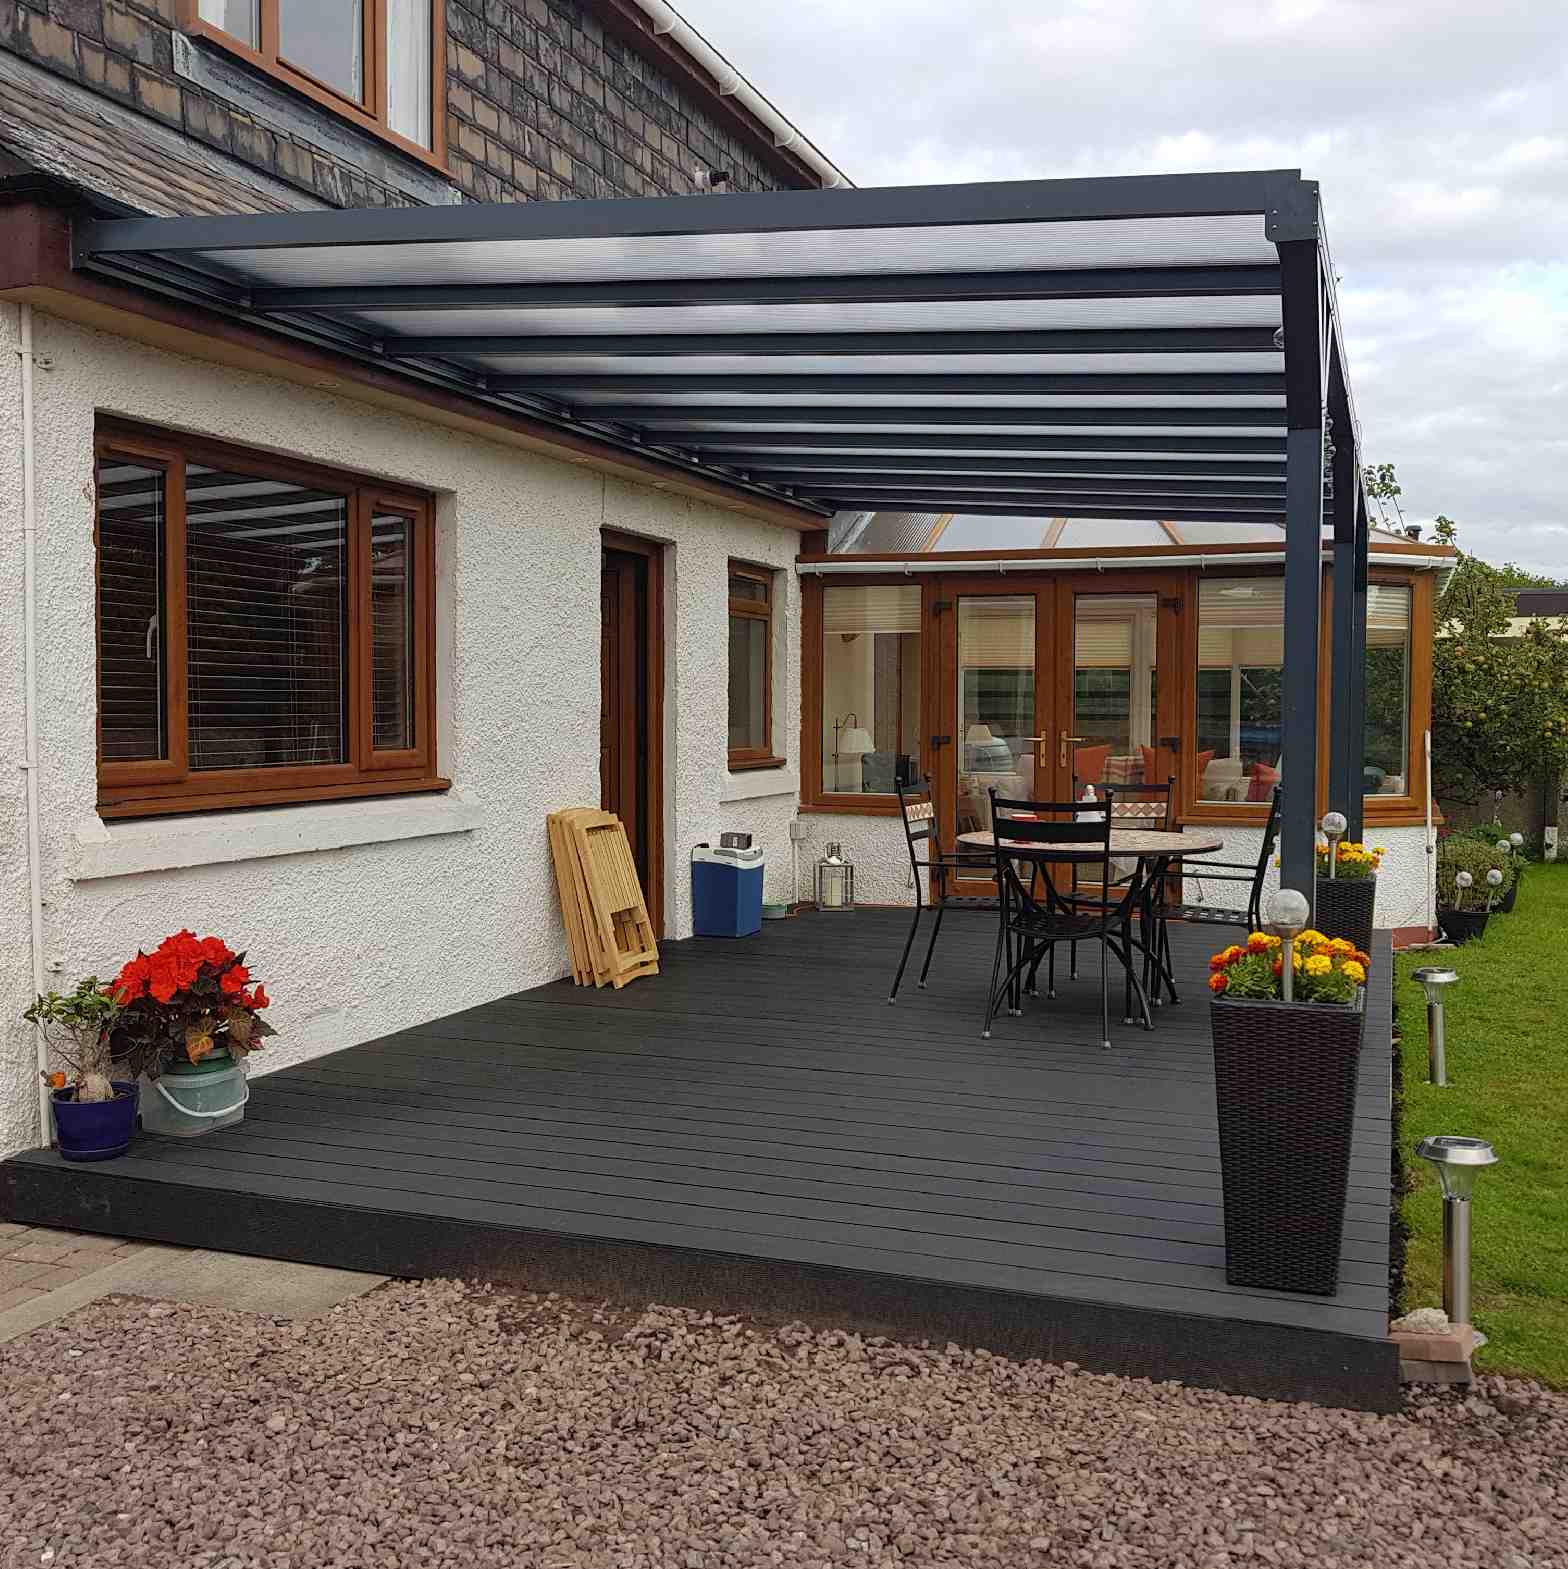 Buy Omega Verandah, Anthracite Grey, 16mm Polycarbonate Glazing - 2.1m (W) x 1.5m (P), (2) Supporting Posts online today